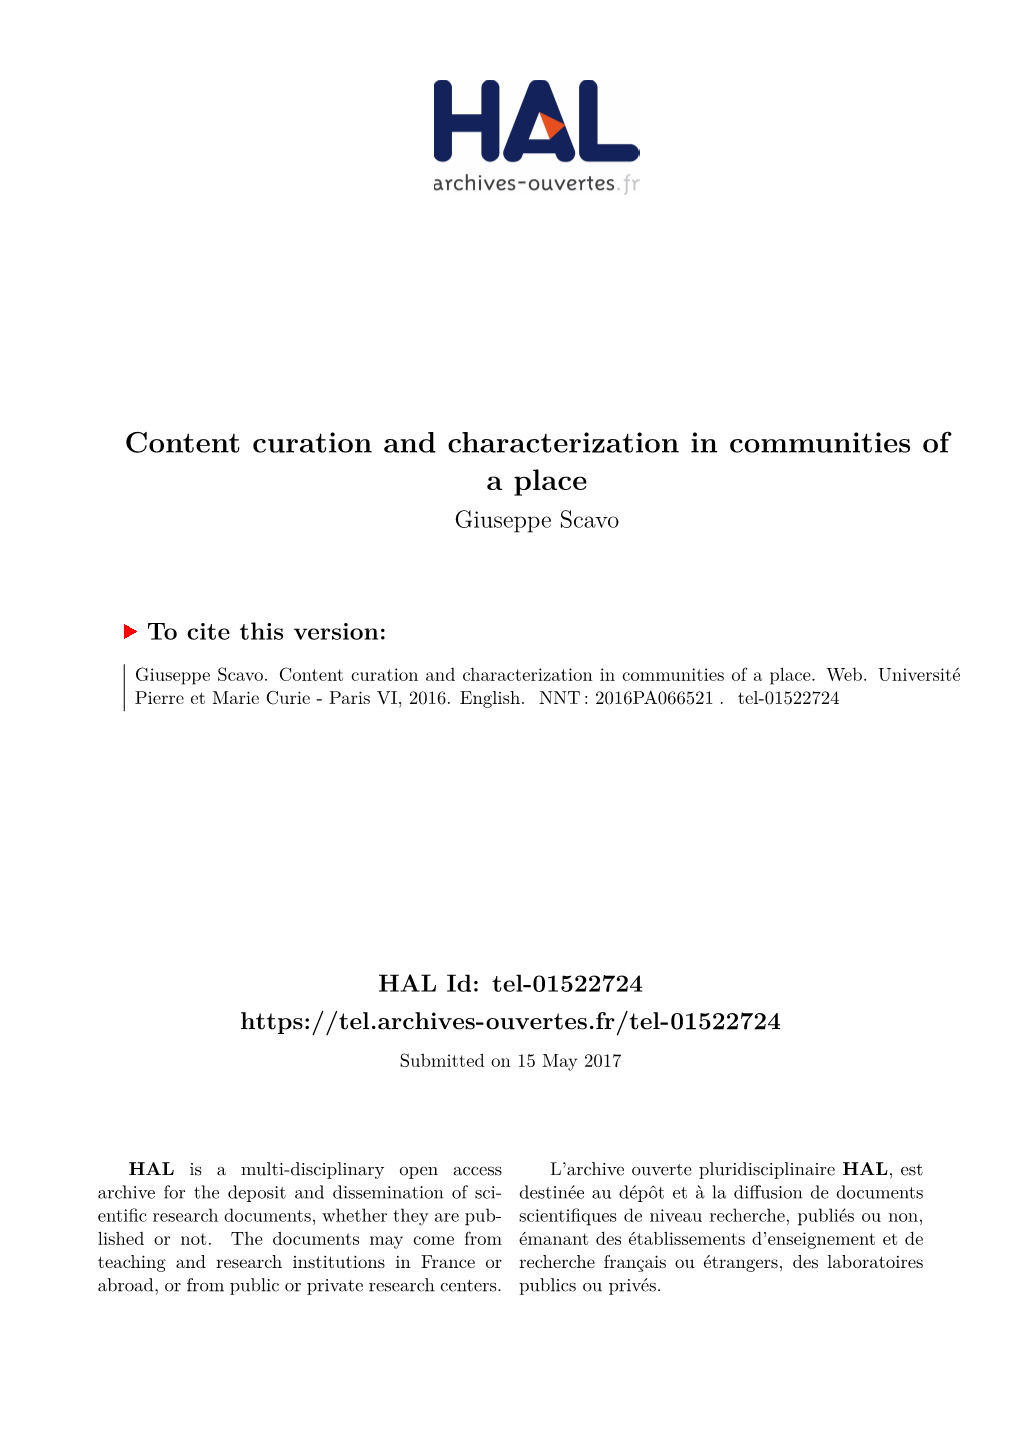 Content Curation and Characterization in Communities of a Place Giuseppe Scavo